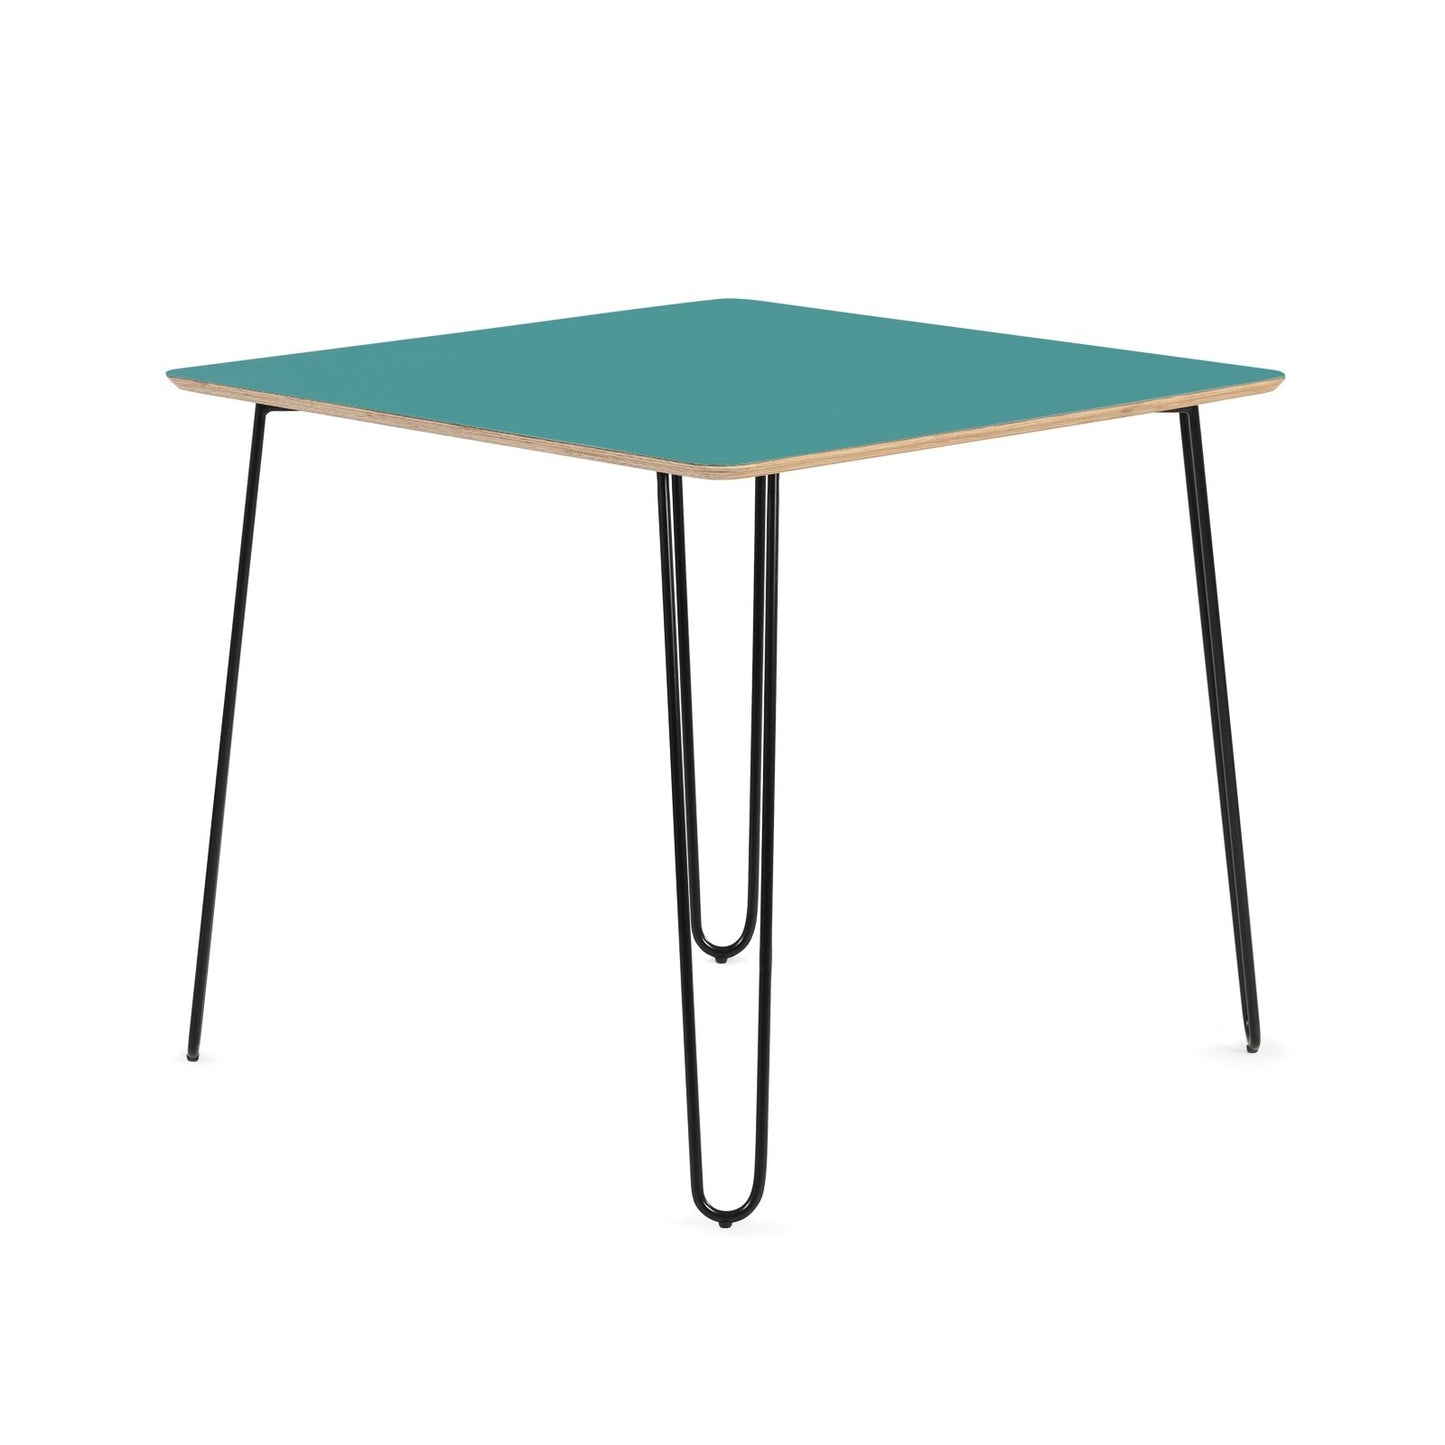 Table Mannequin MQ 03 - Turquoise